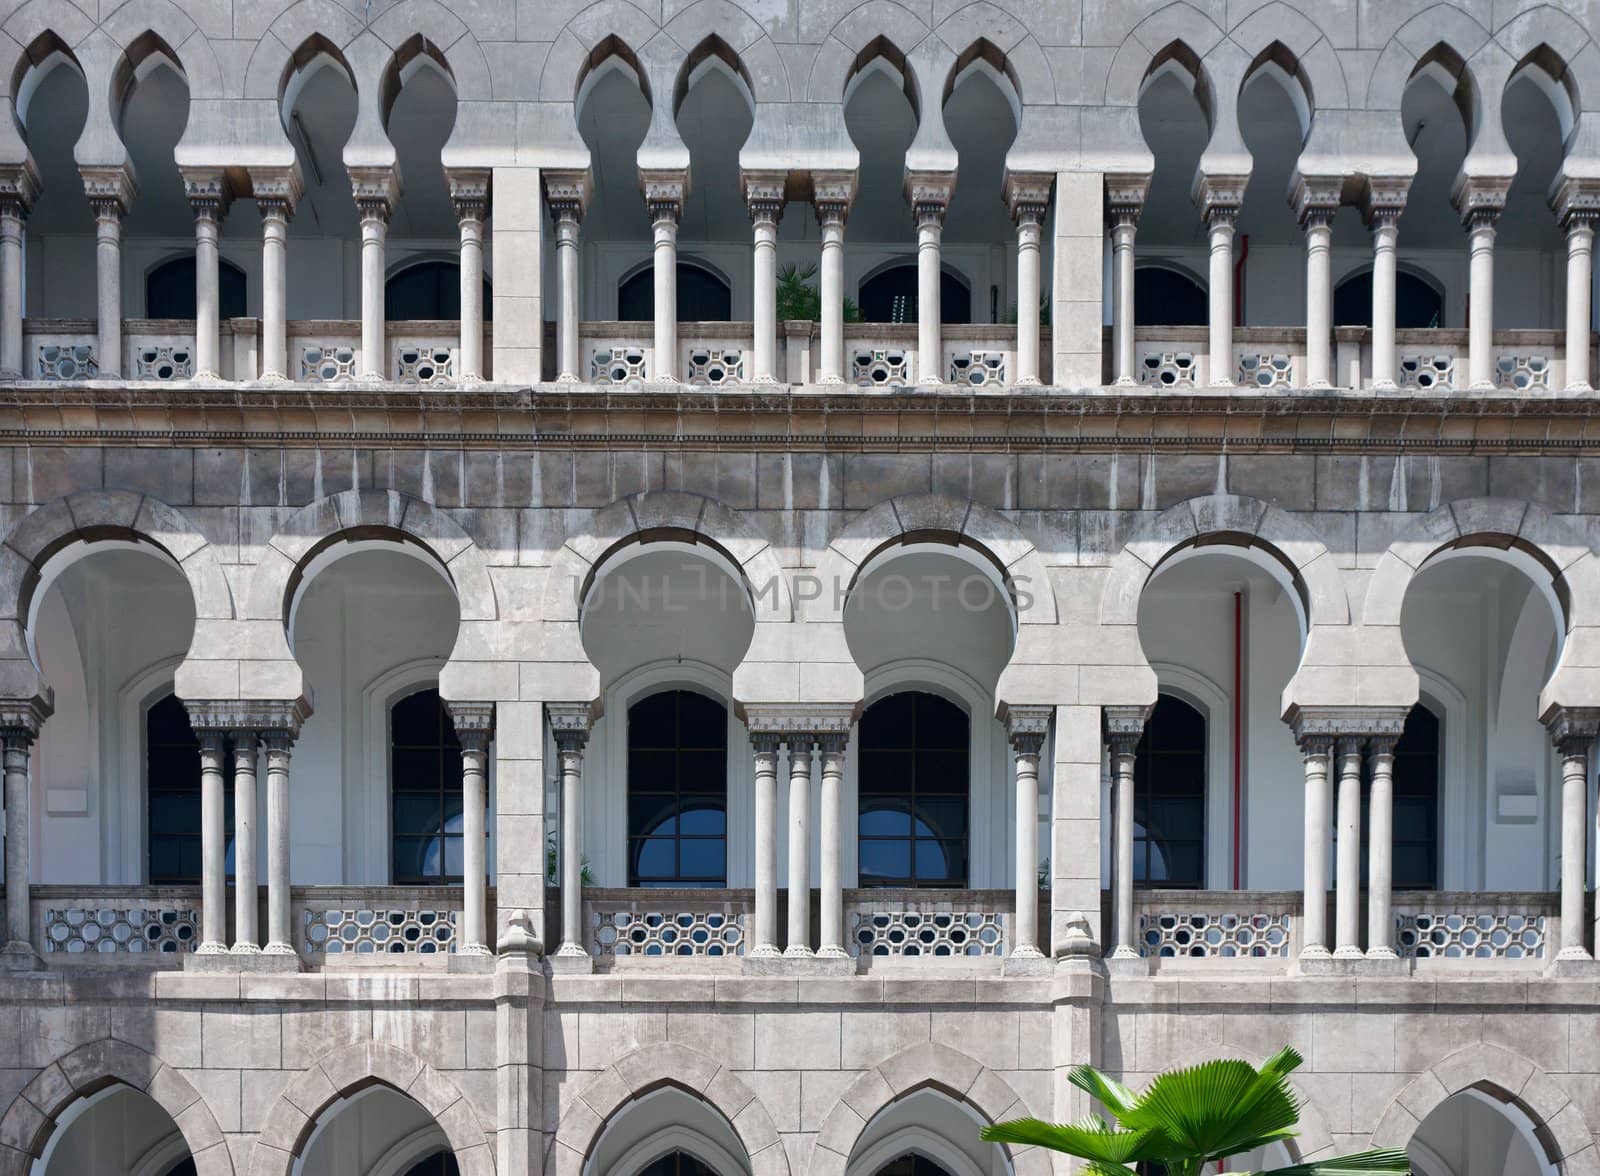 moorish architecture in malaysia by clearviewstock